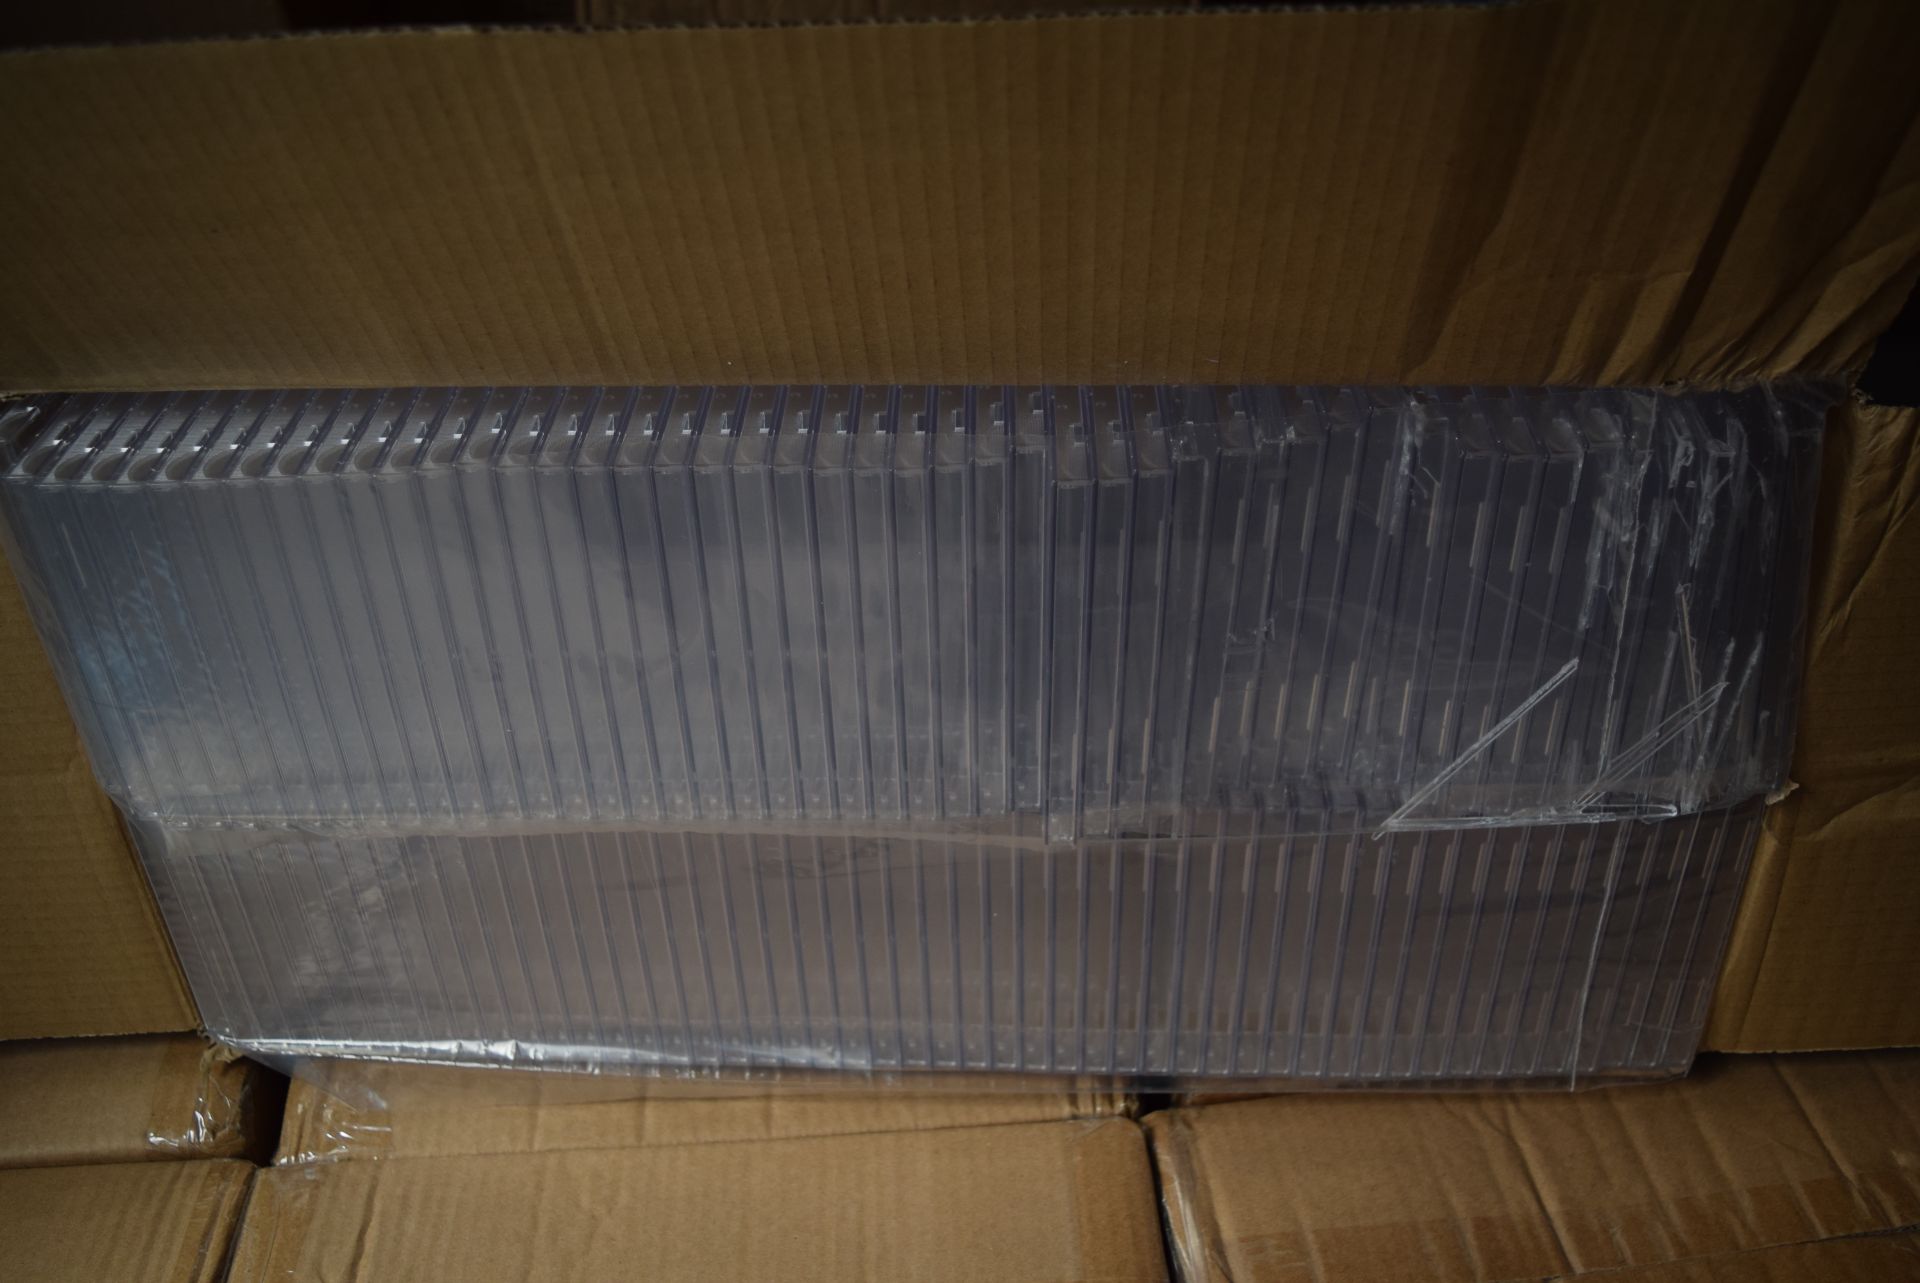 1 X BOXED BRAND NEW CONTAINING 200 PIECES OF CLEAR CD JEWEL CASES